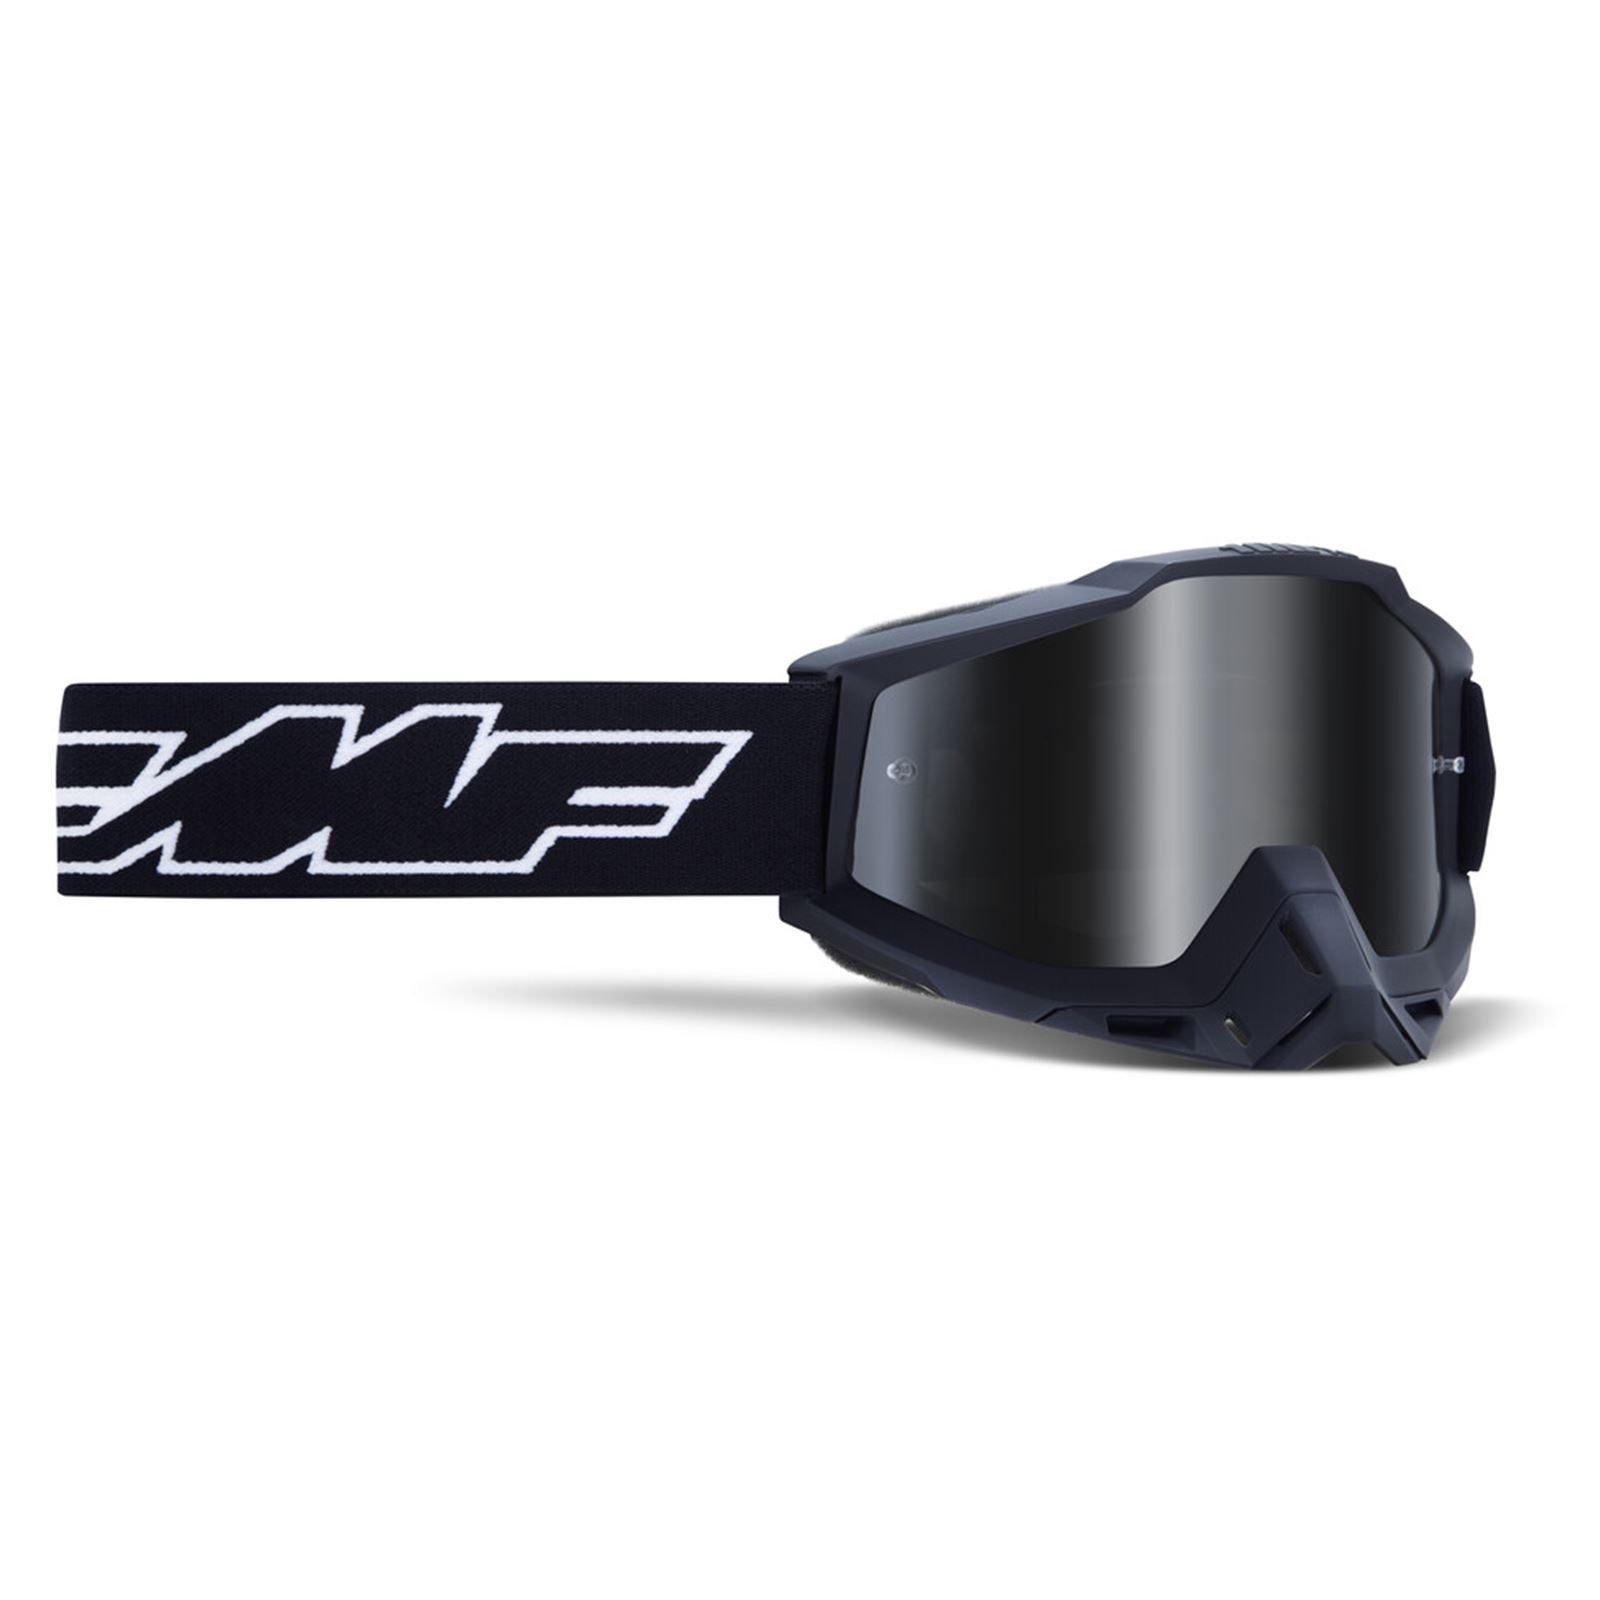 FMF Racing Powerbomb Youth Goggles - Rocket Black - Silver Mirror Lens